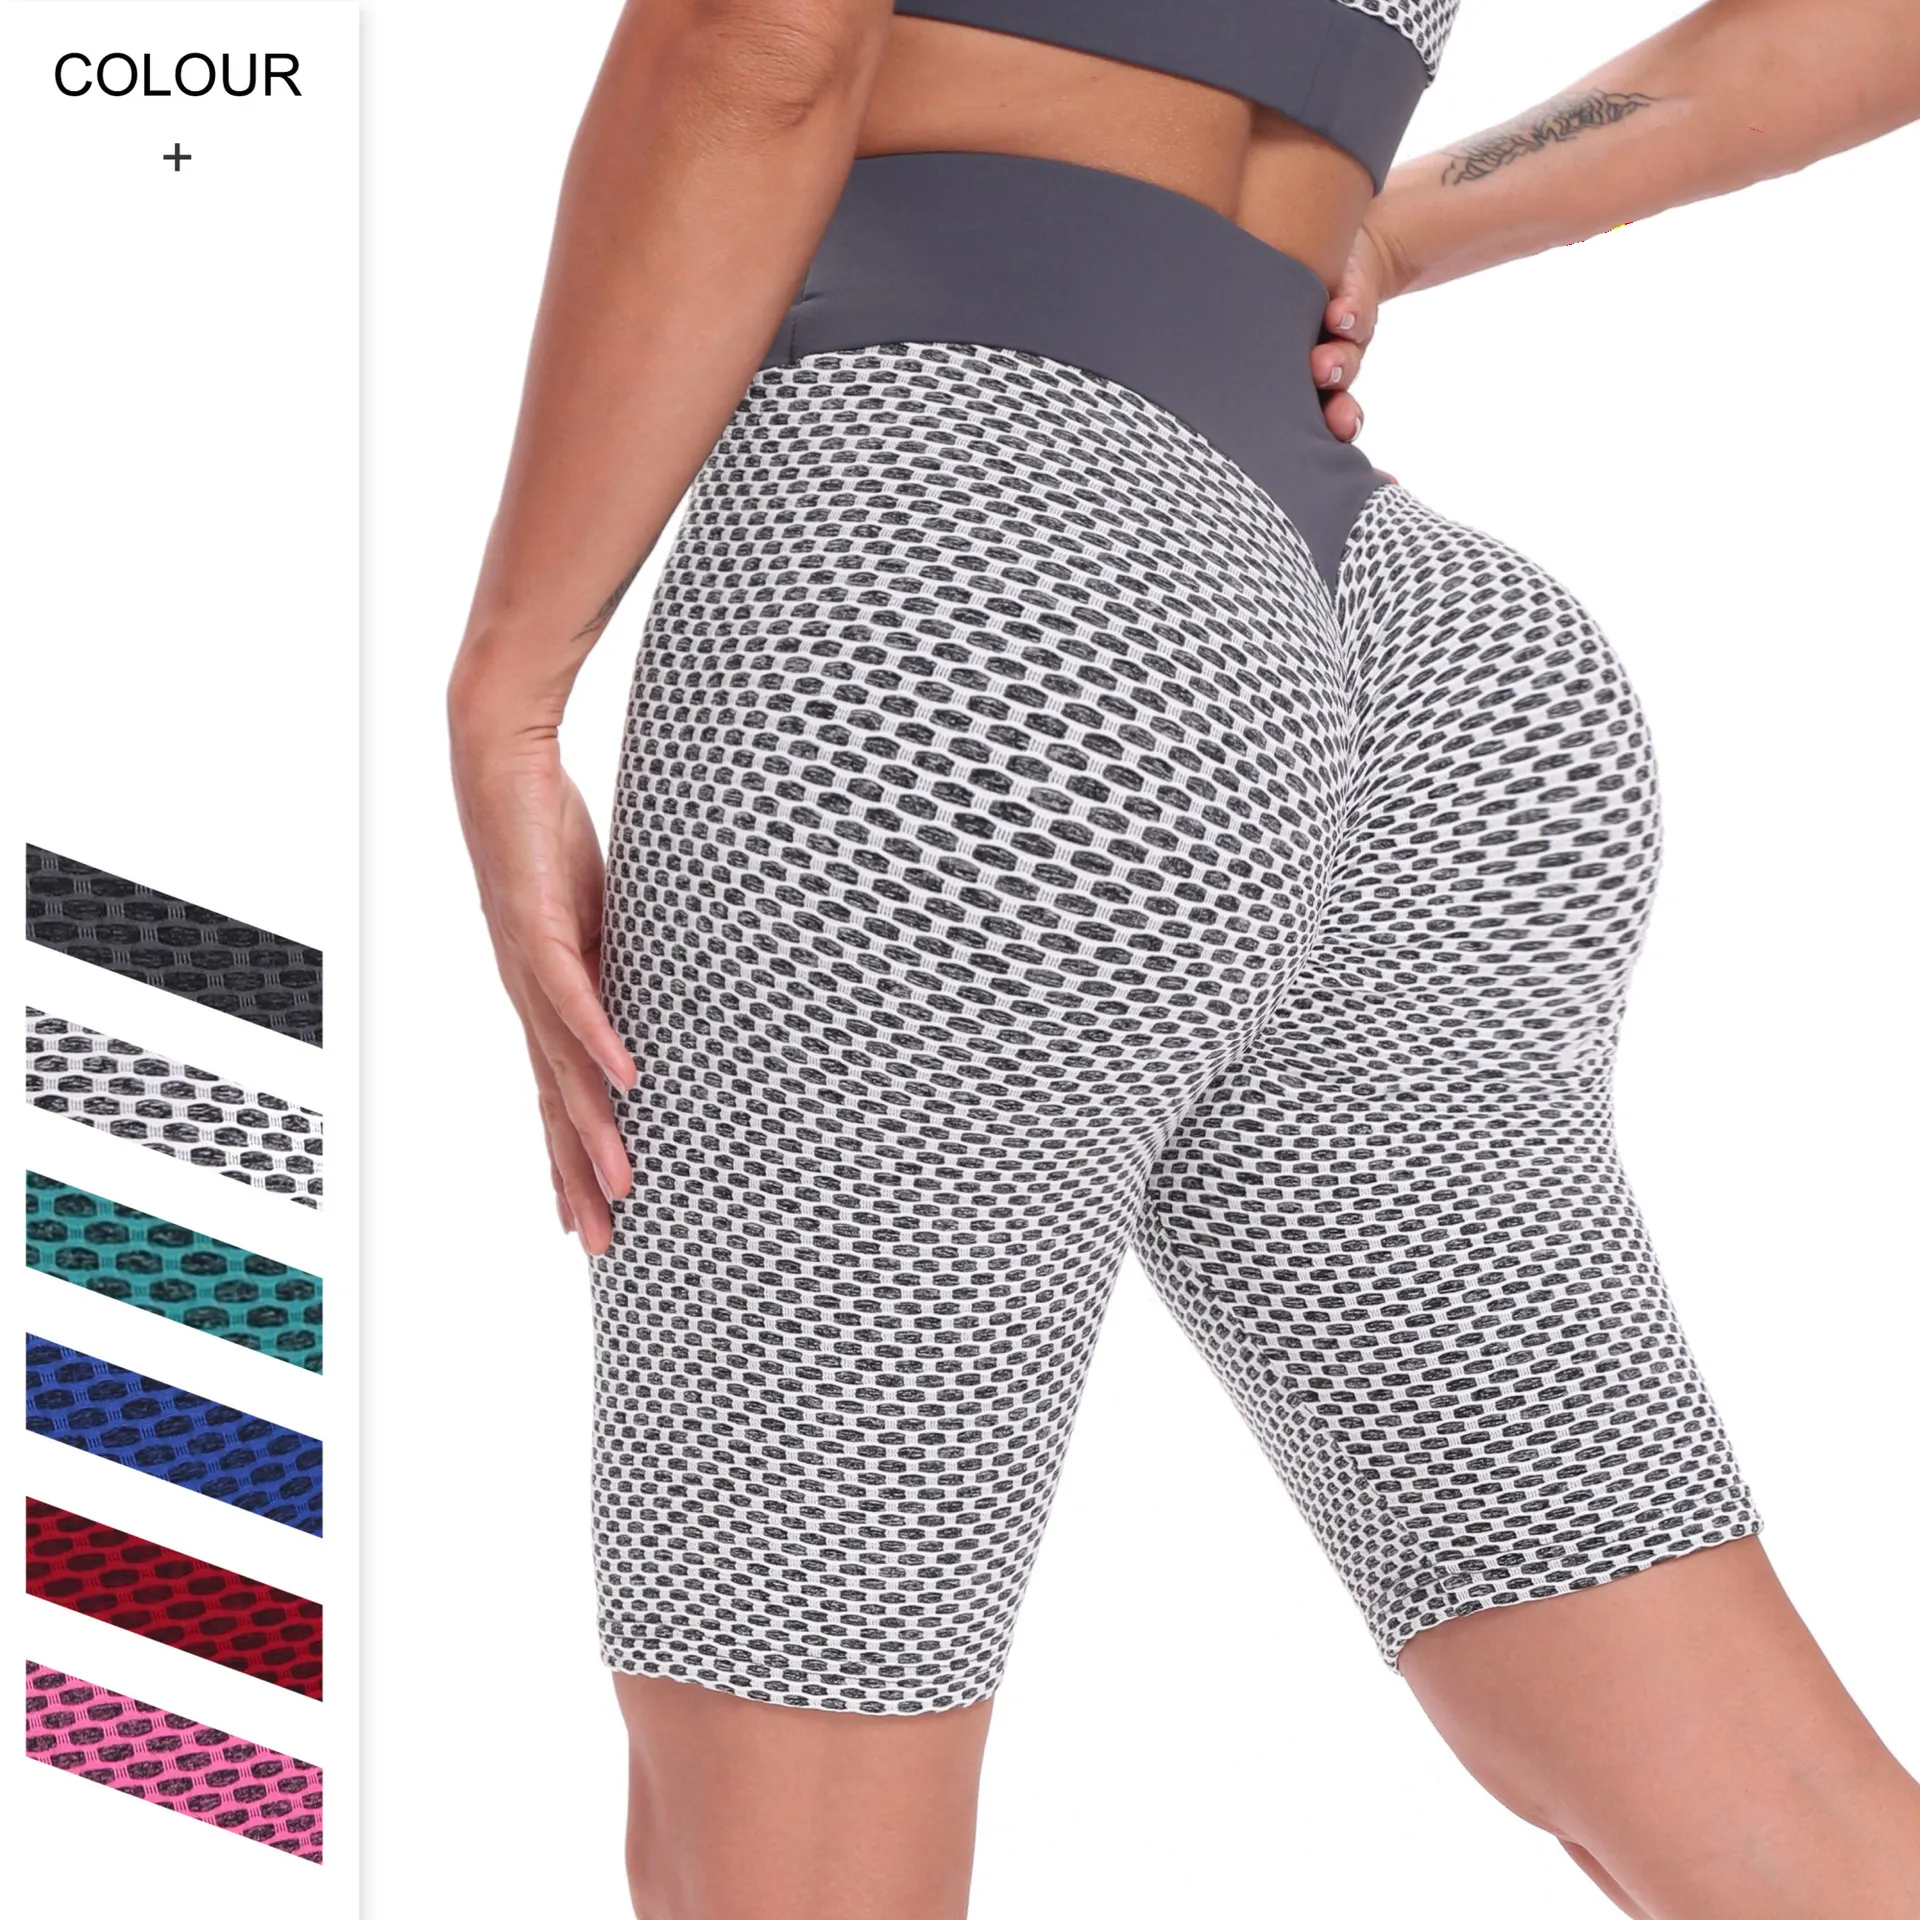 Athletic Wear Yoga suit sports shaping pants women's tights high waist seamless